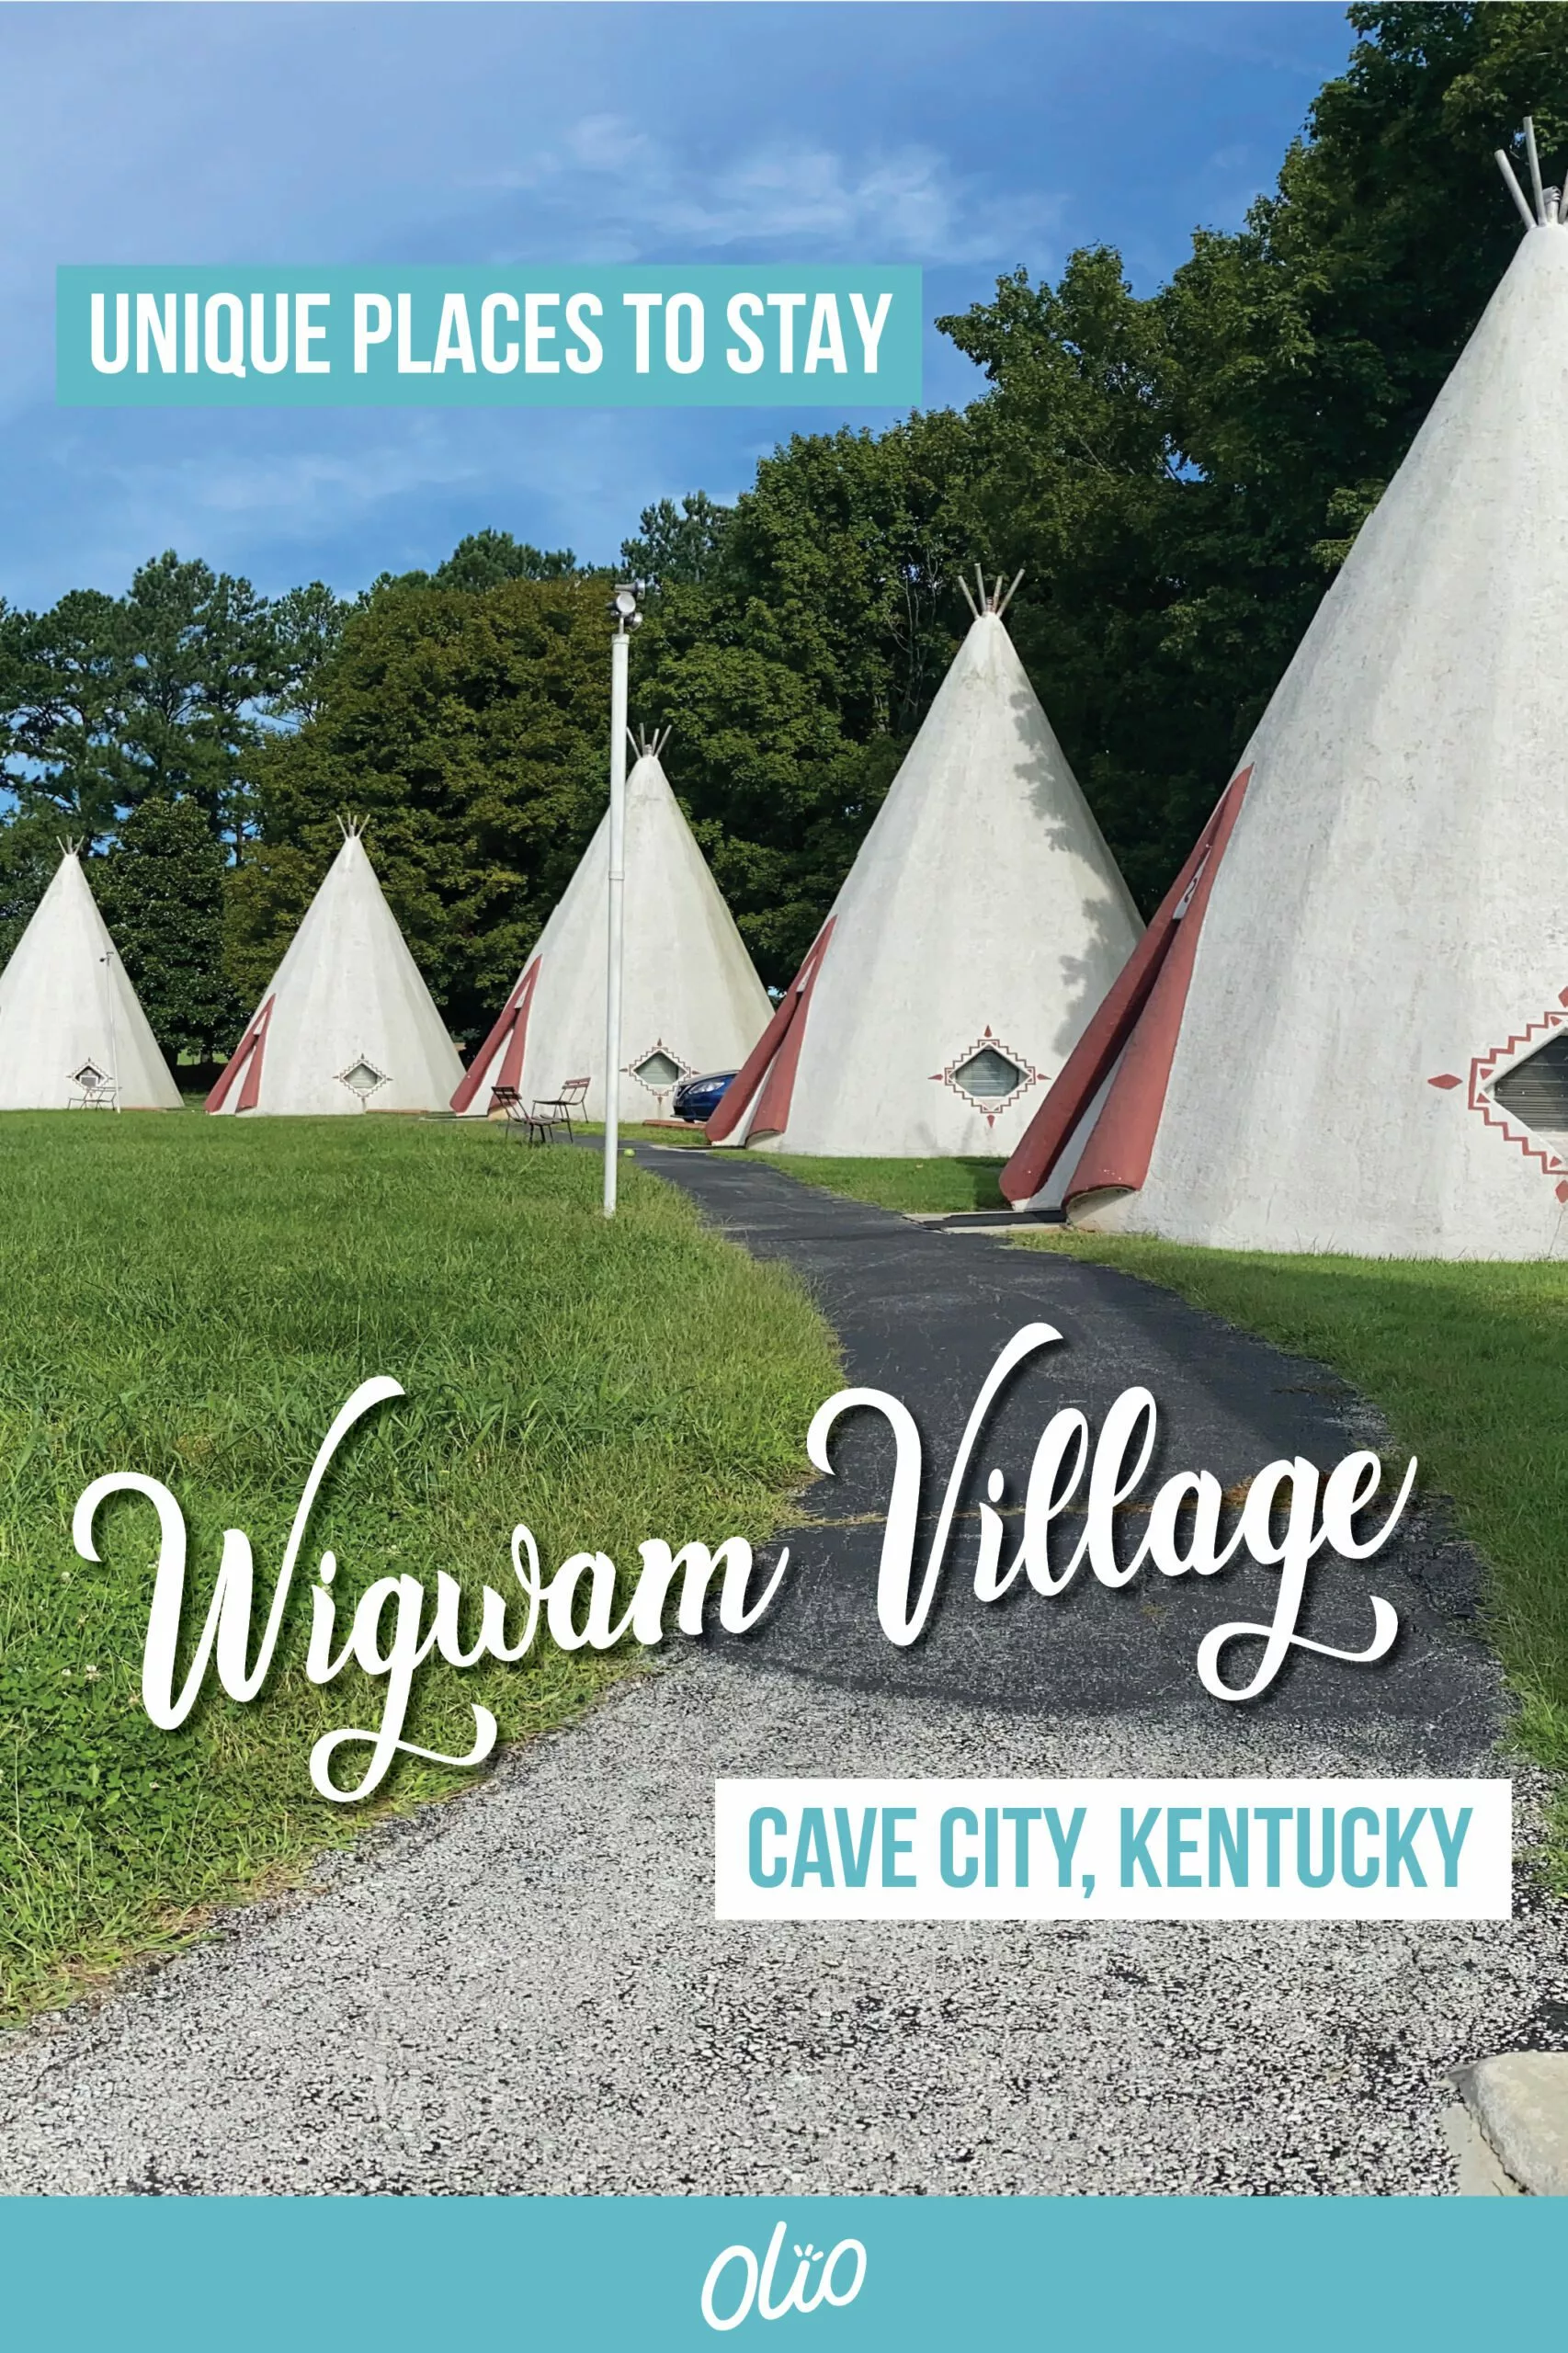 Spend a night in a piece of kitschy roadside history when you stay at the Wigwam Village Inn #2 in Cave City, Kentucky! These historic teepee-shaped rooms were built in the 1930s and still welcome guests year-round. #Kentucky #Americana #RoadsideAmerica